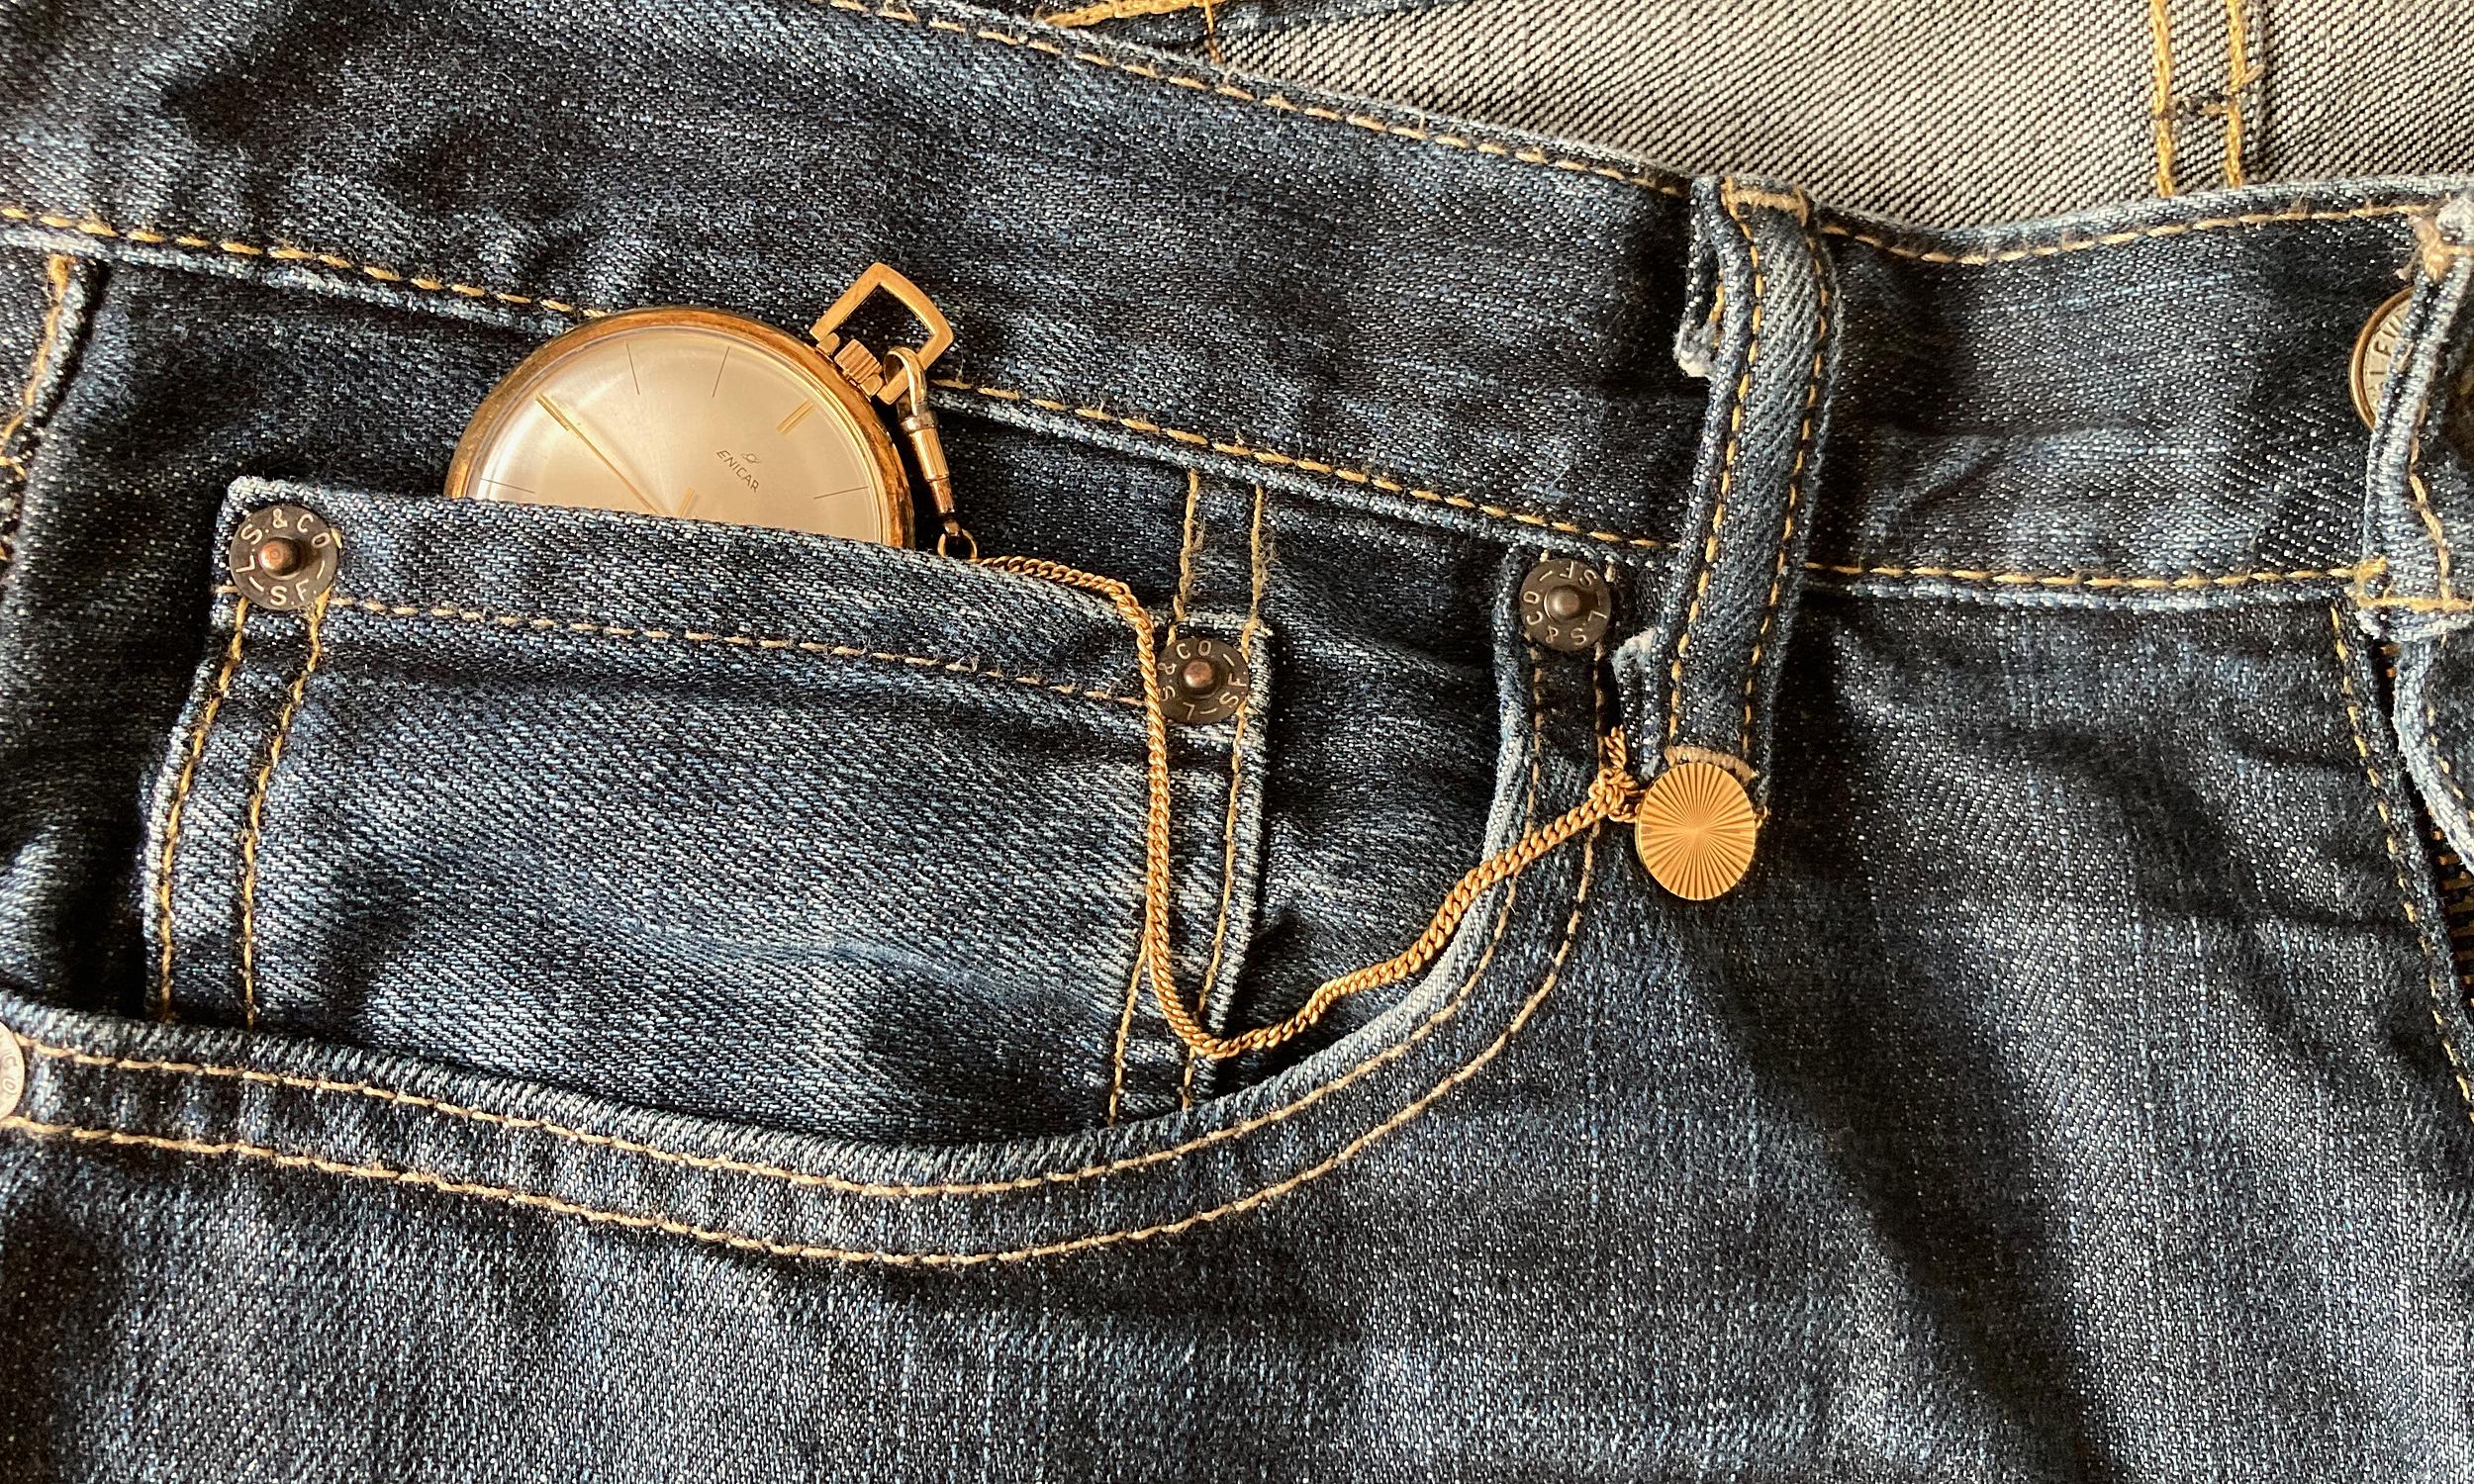 Here's What That Teeny Tiny Pocket on Your Jeans Is For